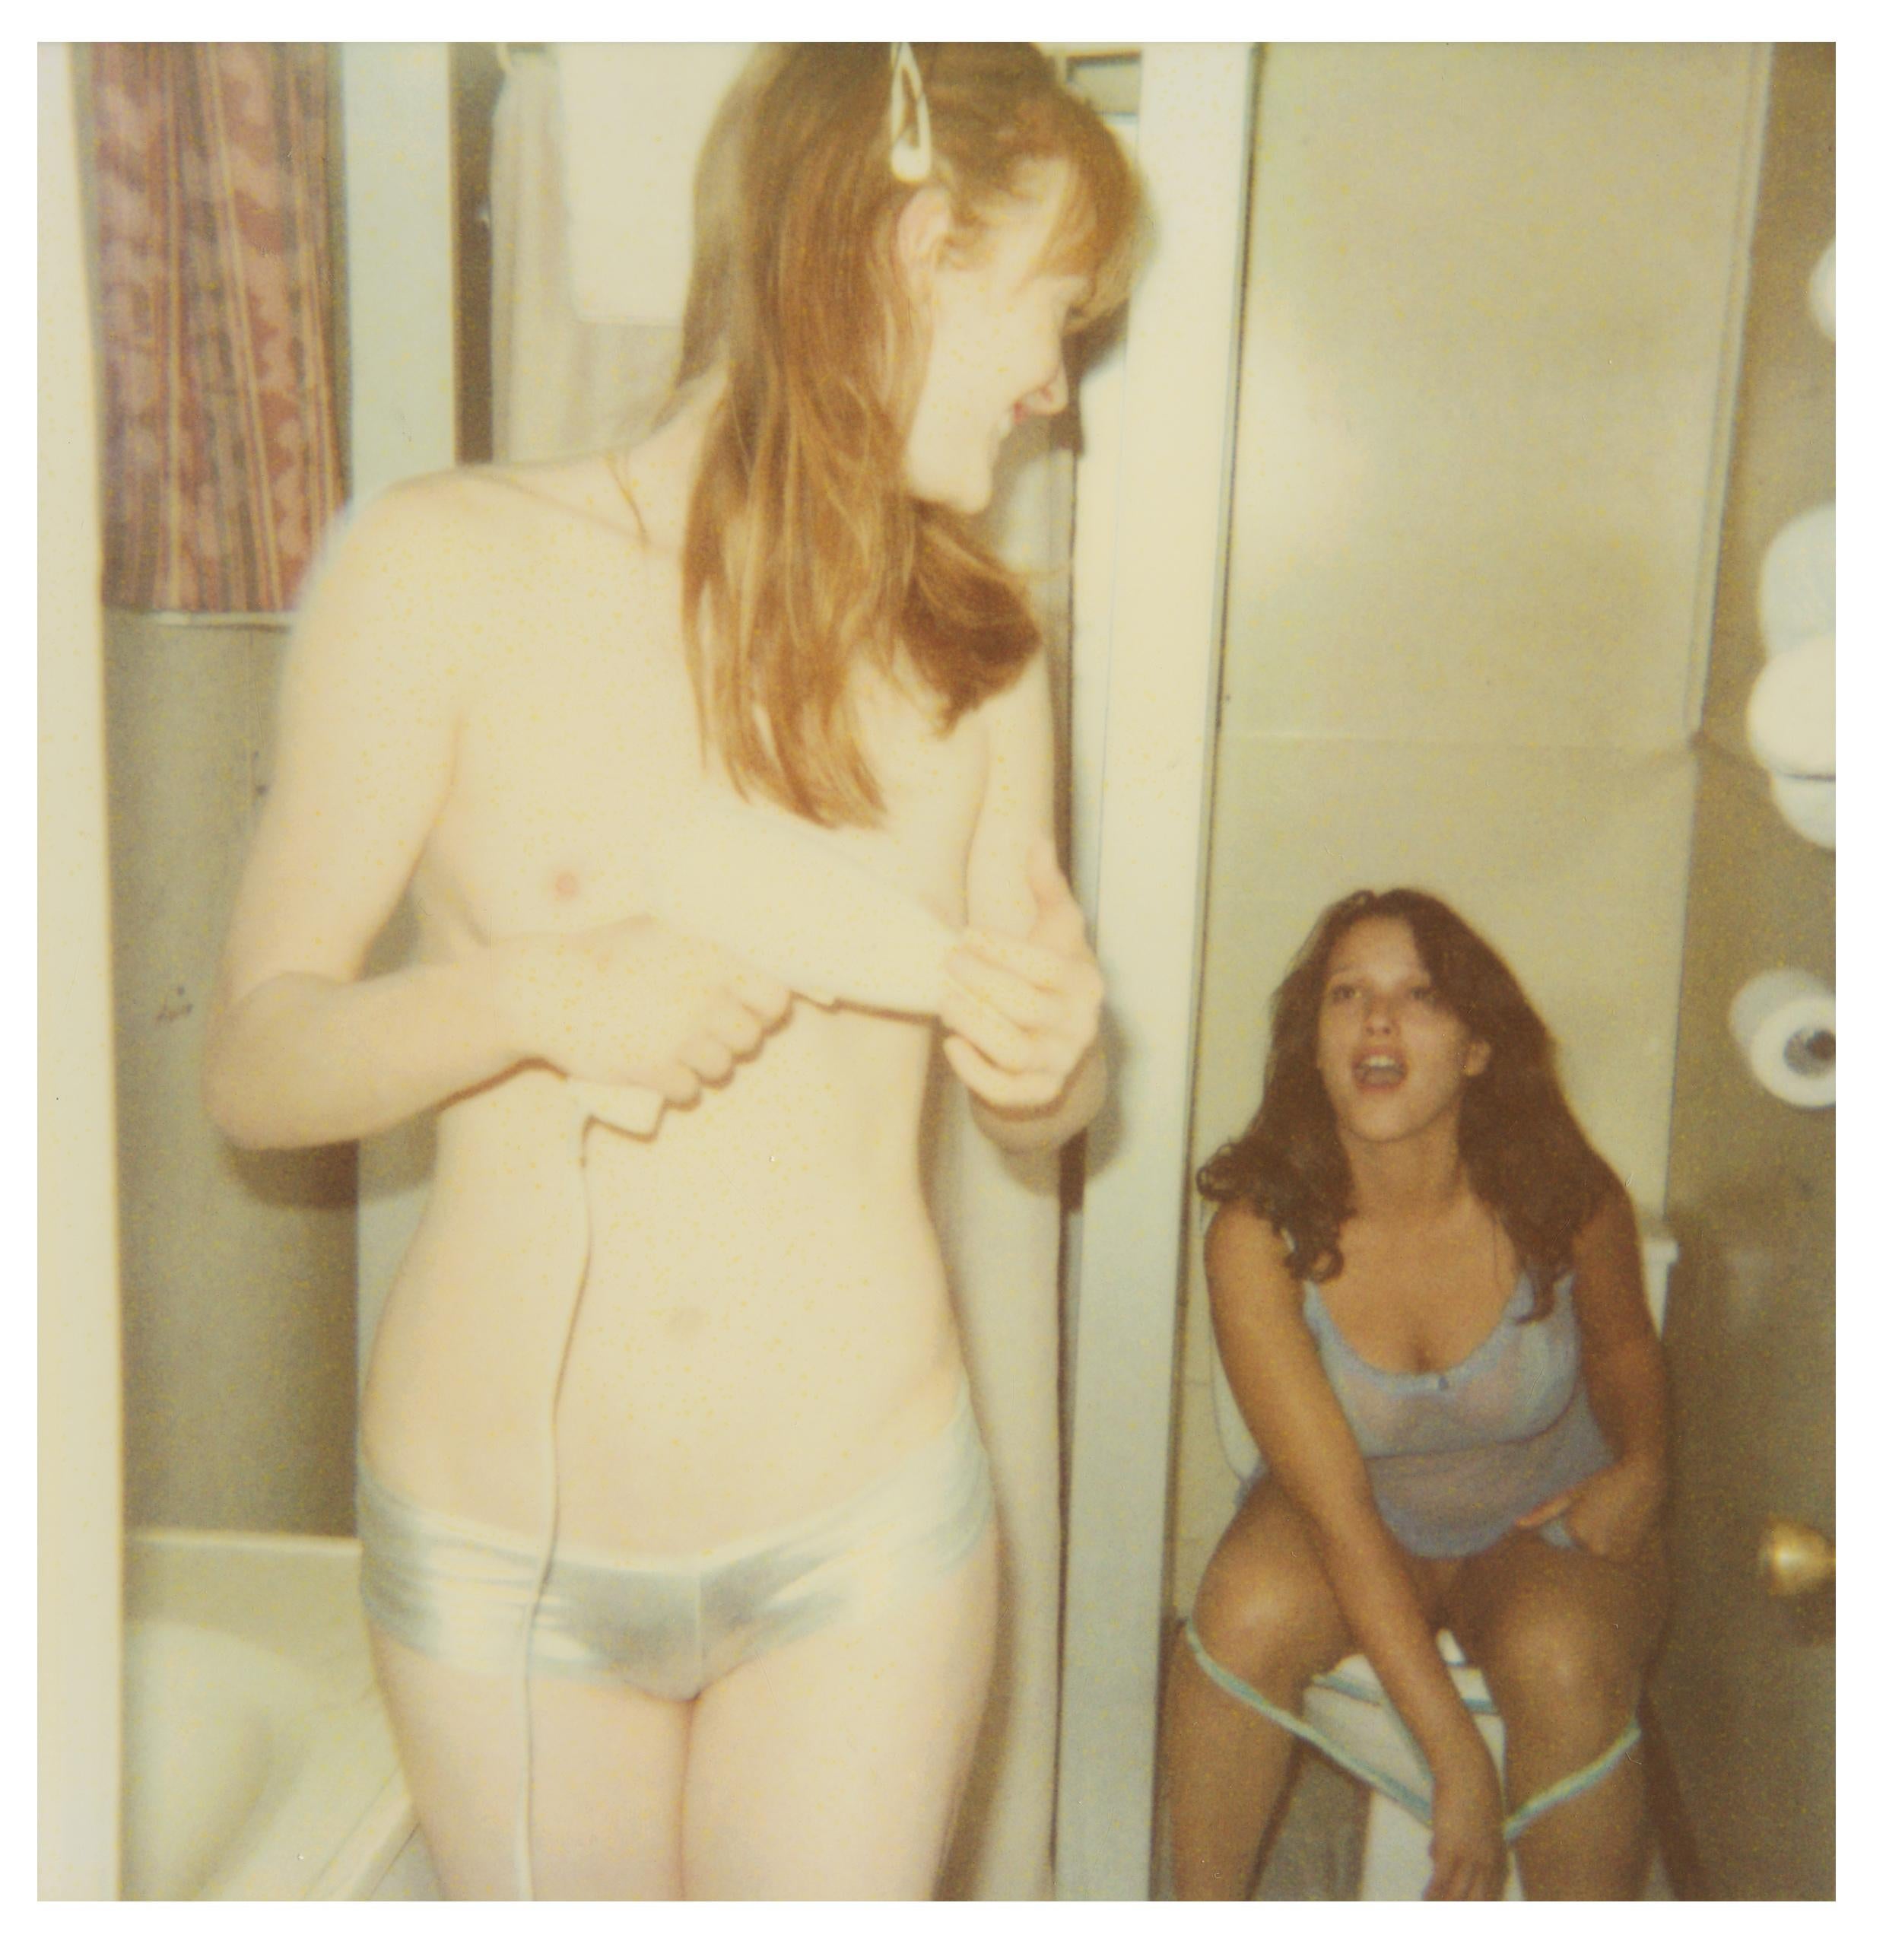 Stefanie Schneider Color Photograph - 'Prom Night' from Till Death do us Part with Daisy McCrackin based on a Polaroid